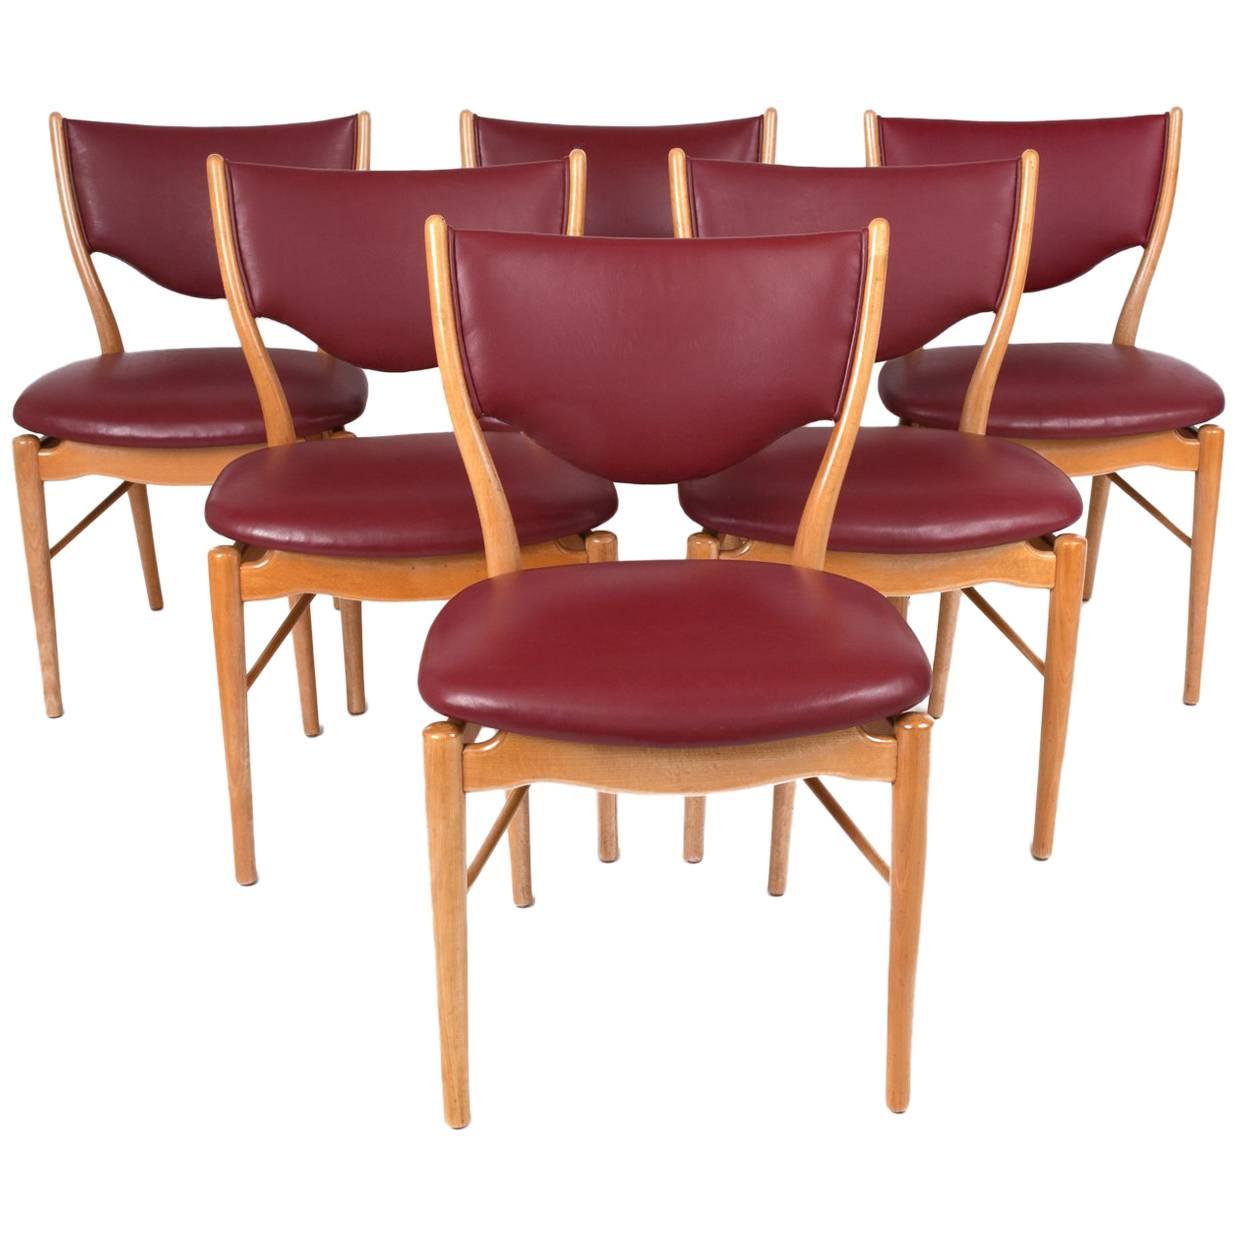 Finn Juhl Sinuous Set of Six Red Dining Chairs in Beech & Leather, Denmark 1950s